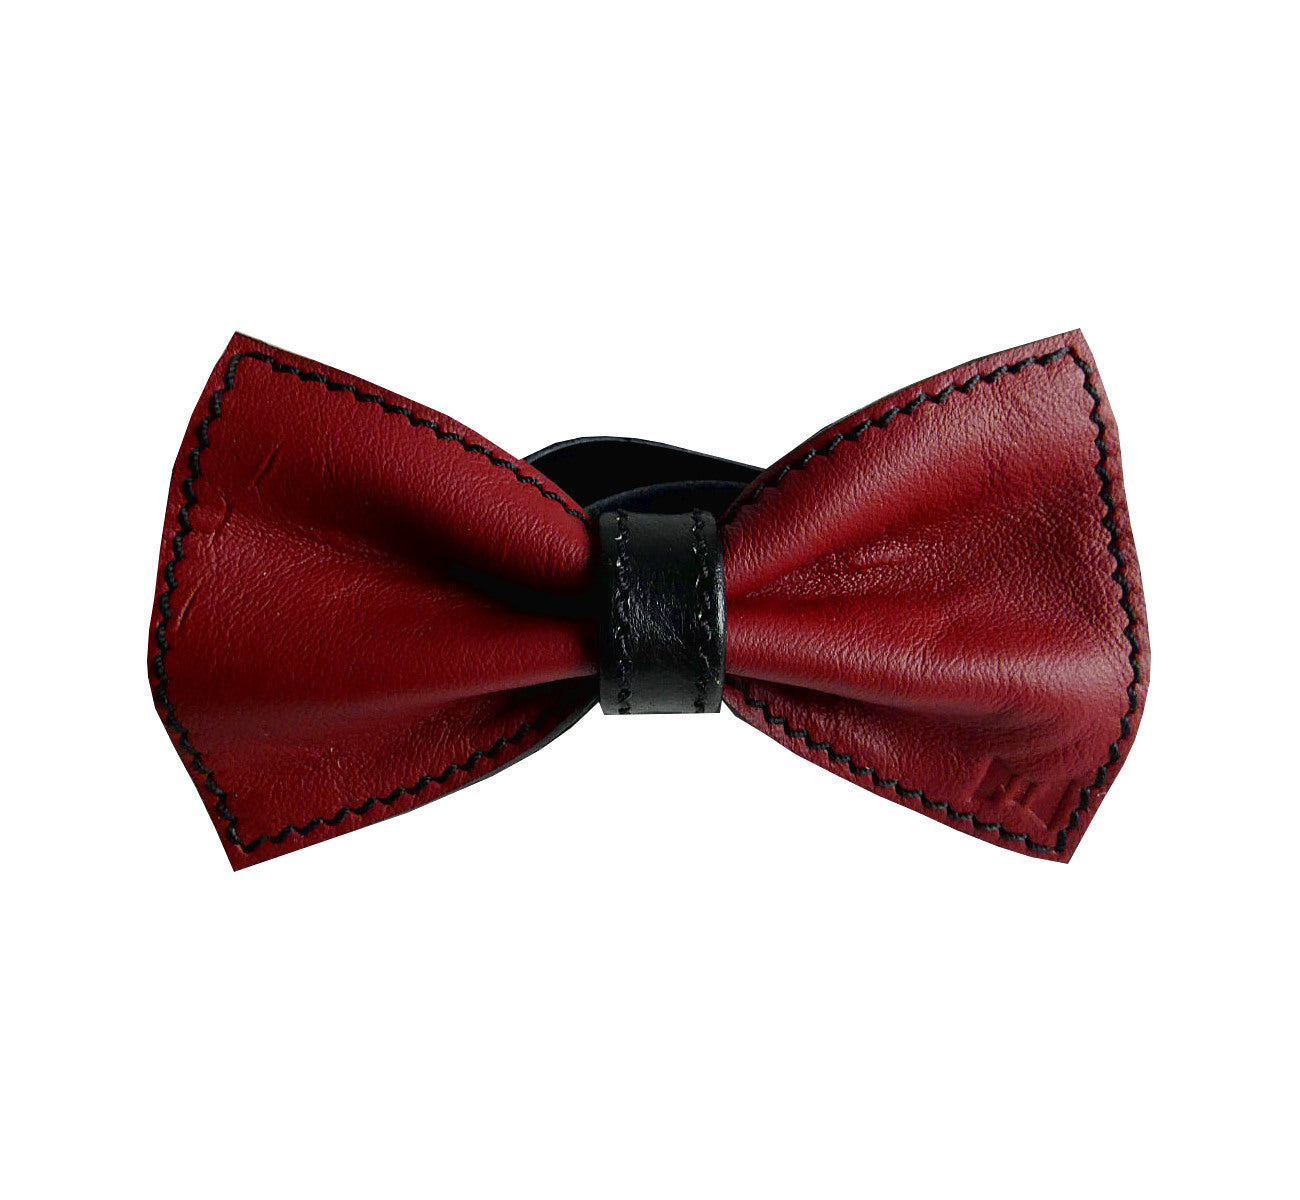 Unique leather bow tie reversible, two-in-one red and black sides, width 12 cm, red side, handmade in Scandinavia